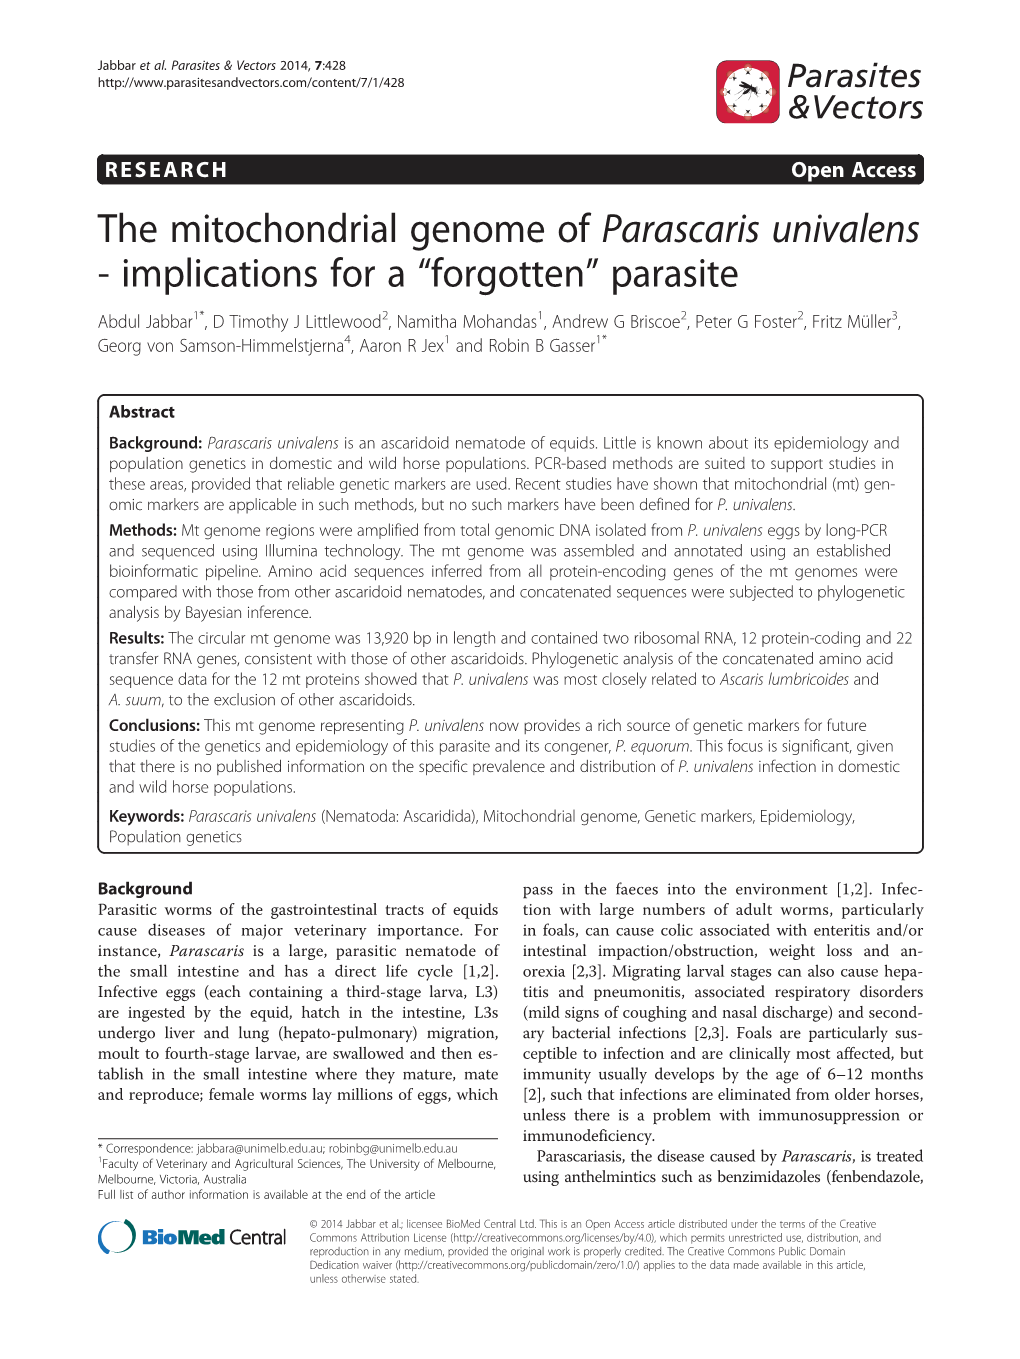 The Mitochondrial Genome of Parascaris Univalens